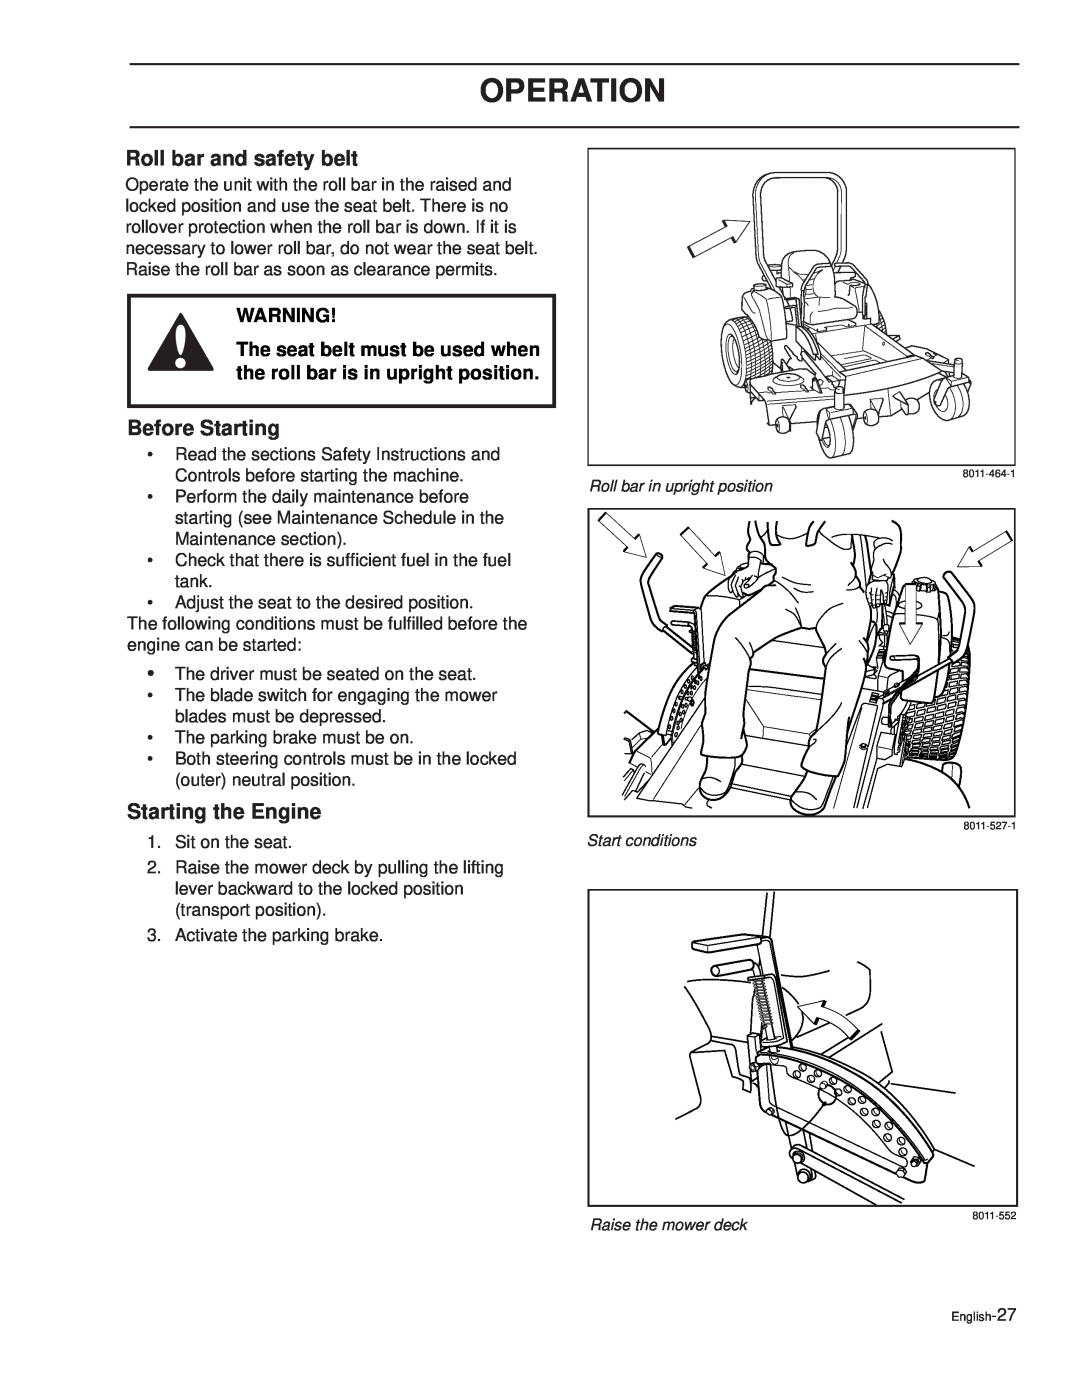 Dixon 30 KOH/968999592, 30 KOH/968999591 manual Roll bar and safety belt, Before Starting, Starting the Engine, Operation 